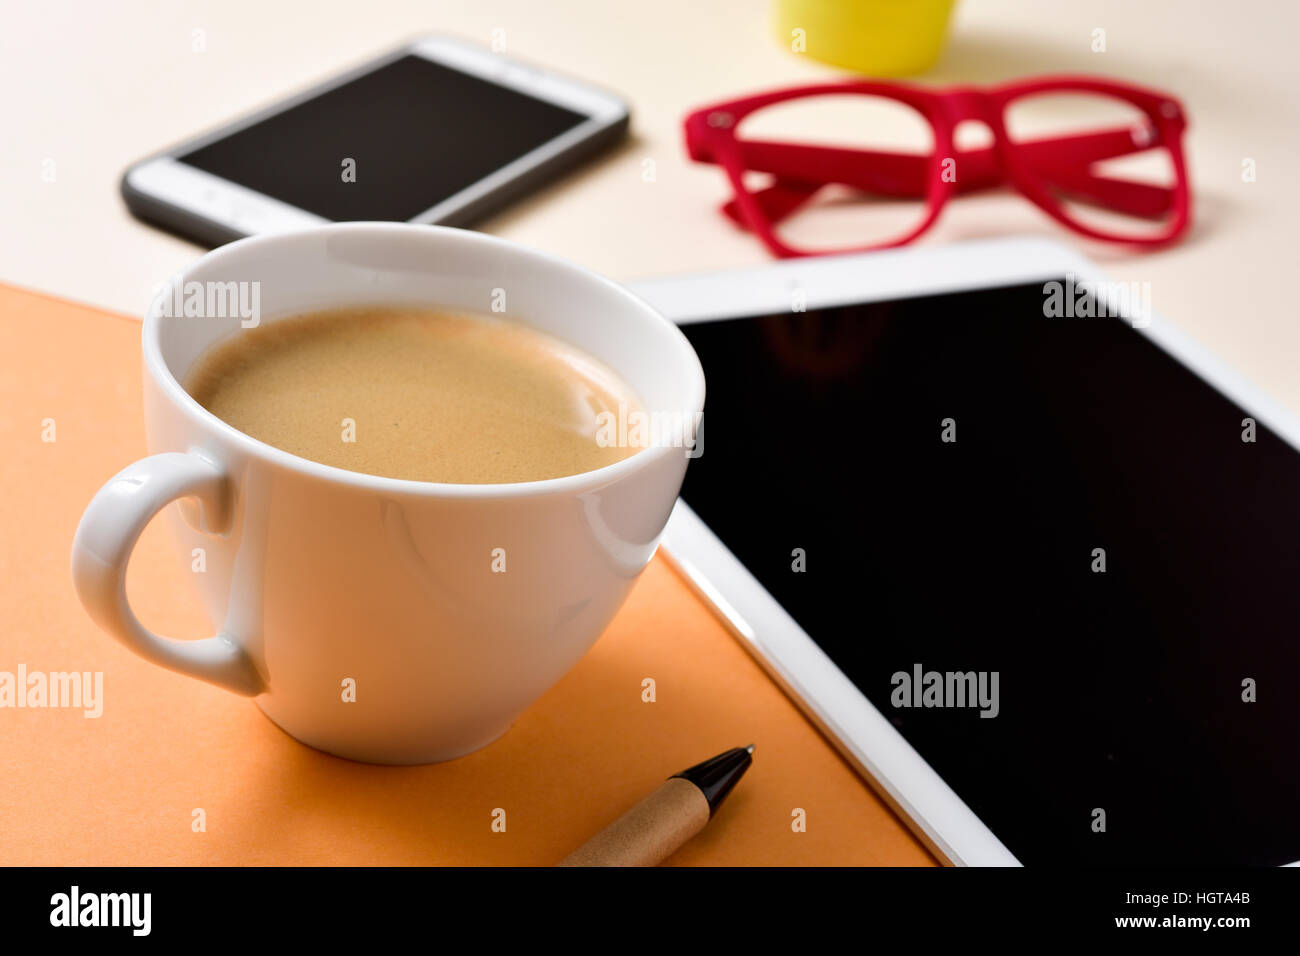 closeup of an office desk full of things, such as a cup with white coffee, a pen, a tablet, a smartphone and a pair of red eyeglasses Stock Photo